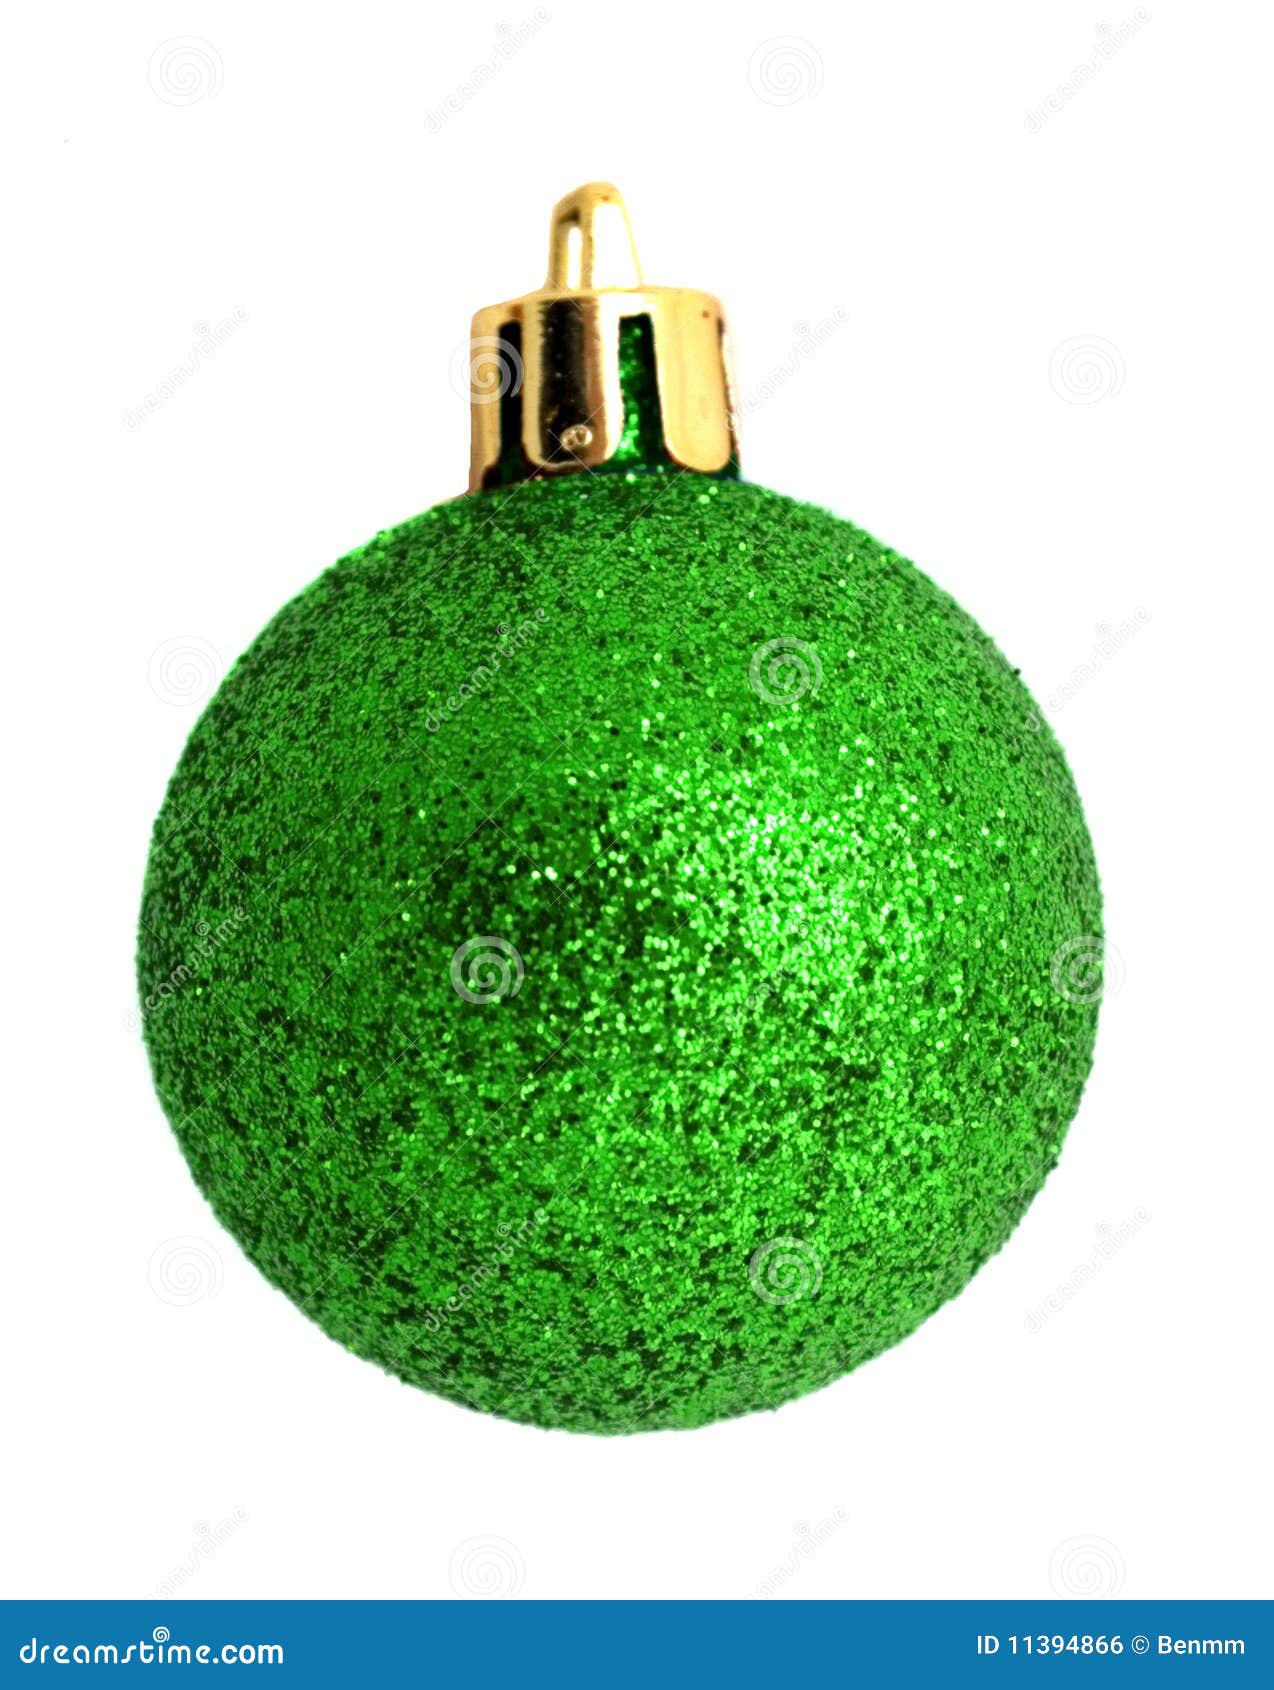 Bauble stock photo. Image of green, color, bauble, season - 11394866